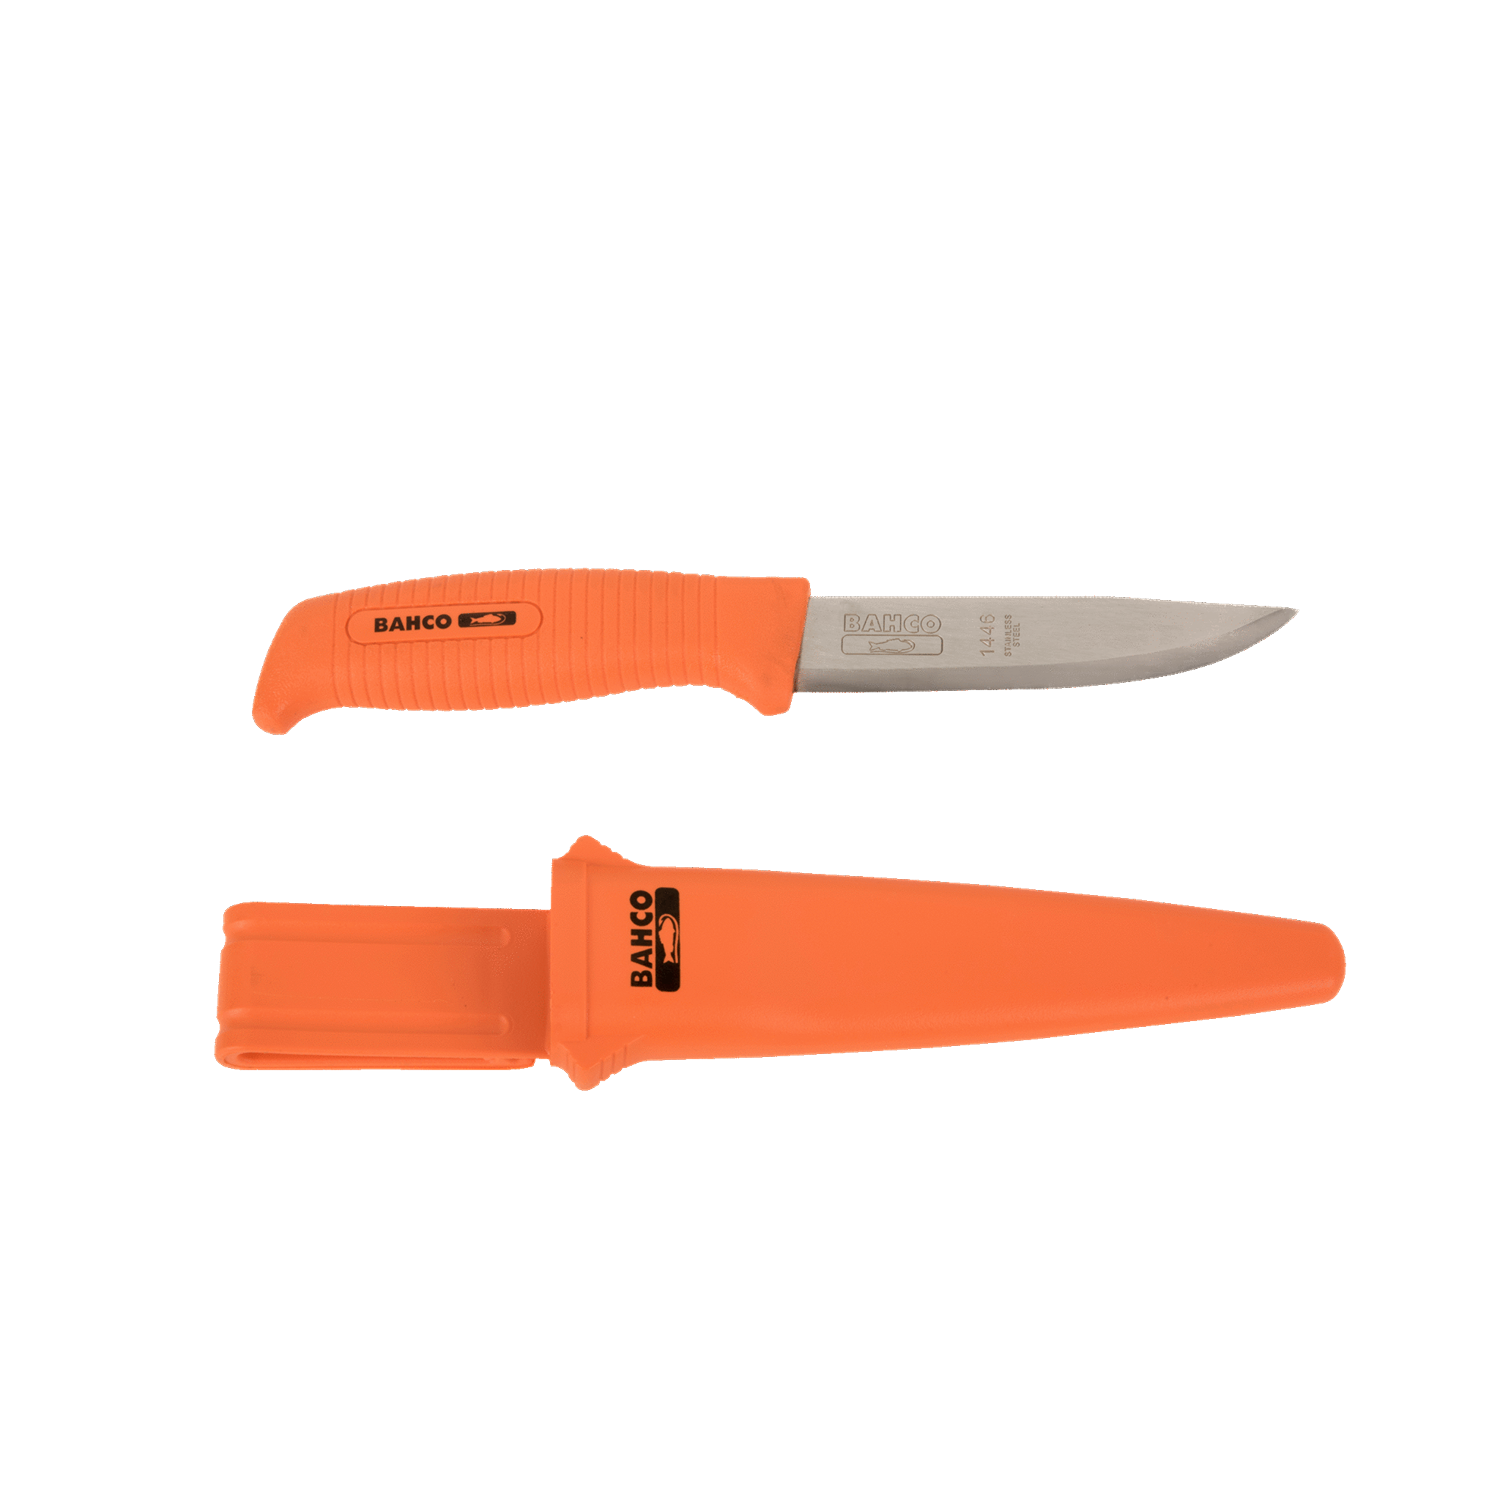 BAHCO 1446-OV Multipurpose Tradesman Knife with 1Component Handle - Premium Multipurpose Tradesman Knife from BAHCO - Shop now at Yew Aik.